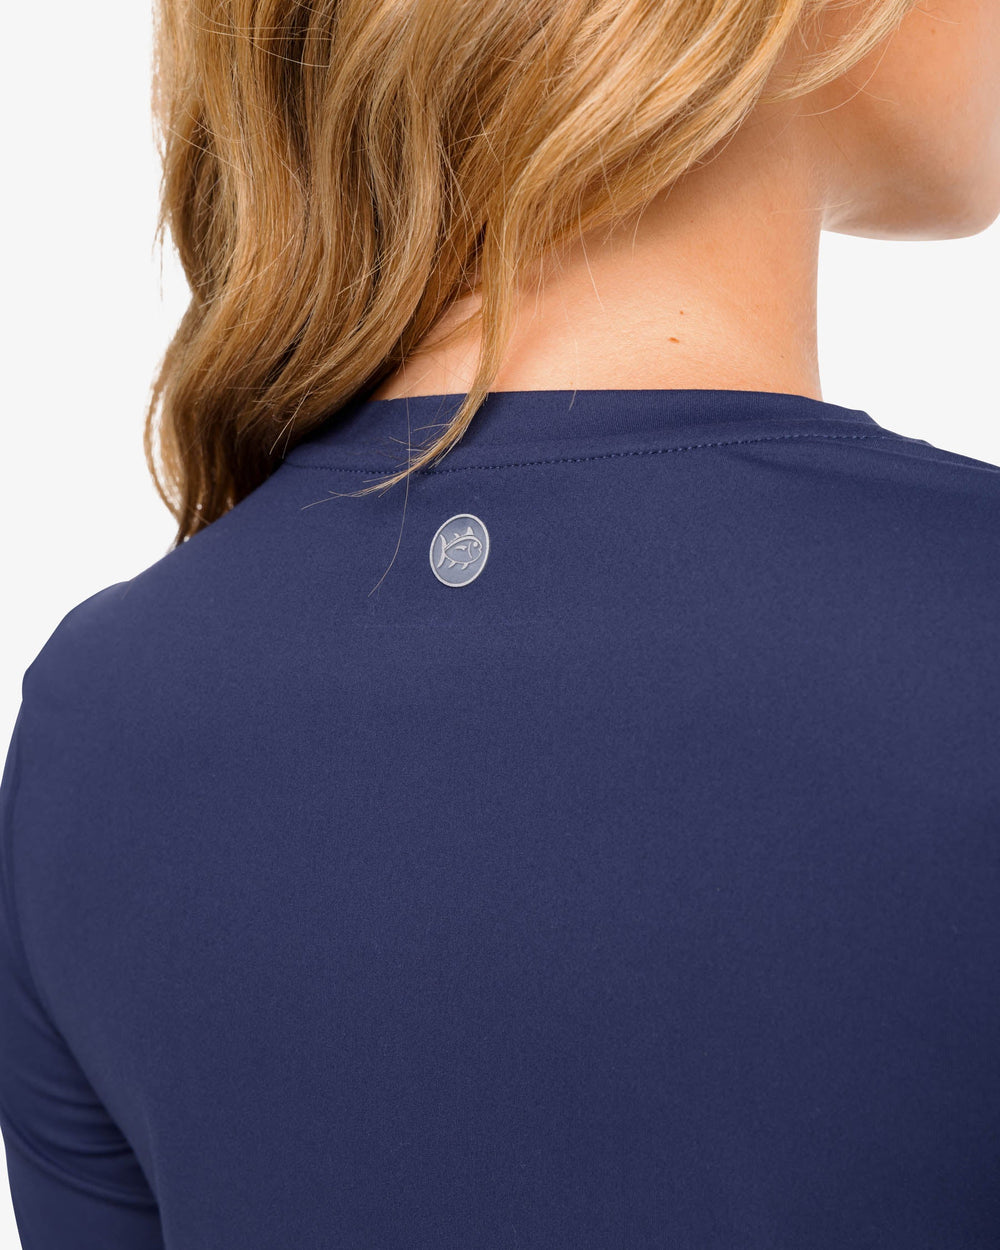 The yoke view of the Demy Long Sleeve Performance Top by Southern Tide - Nautical Navy